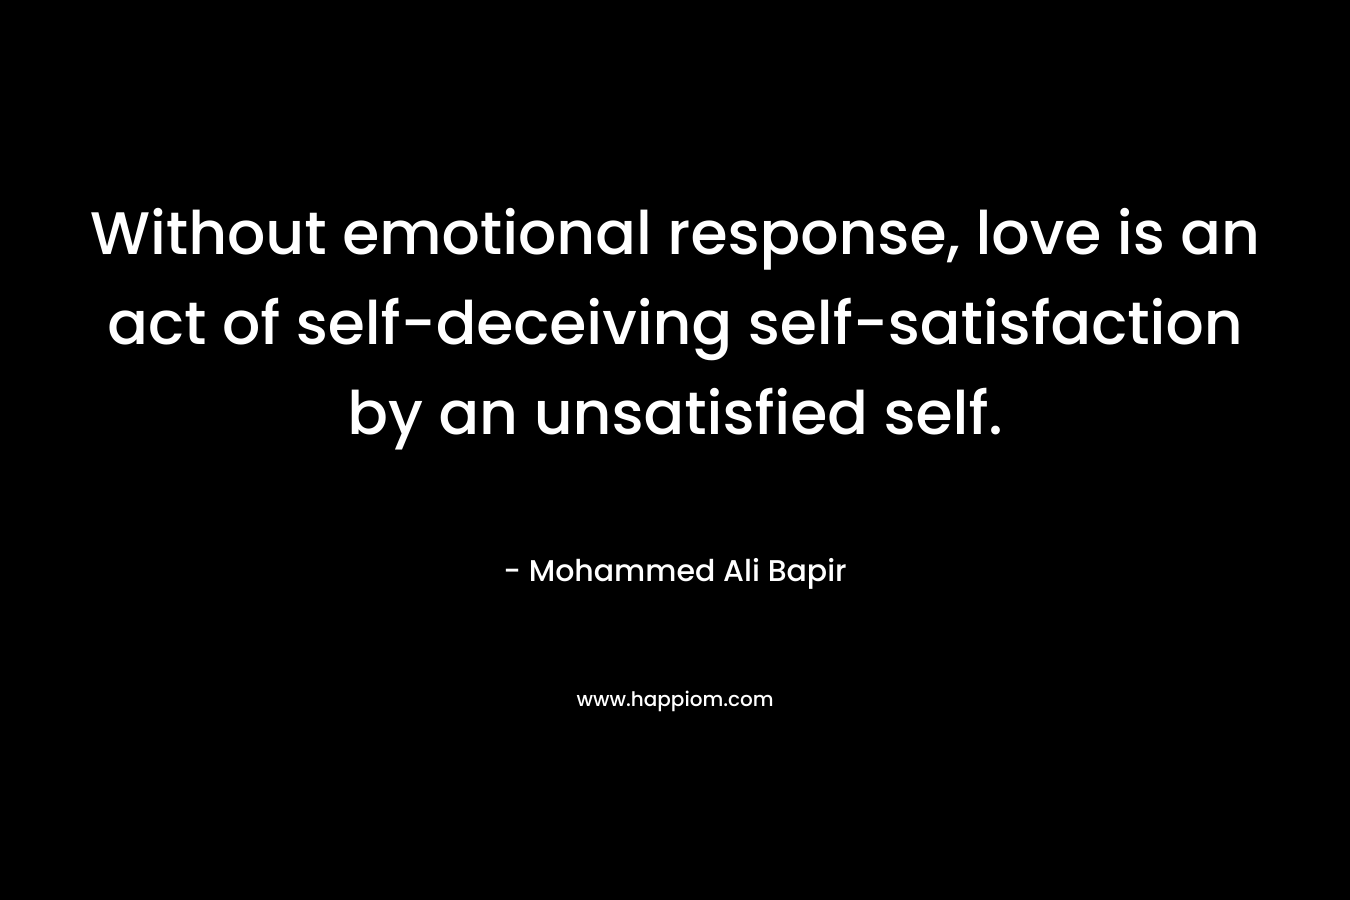 Without emotional response, love is an act of self-deceiving self-satisfaction by an unsatisfied self.